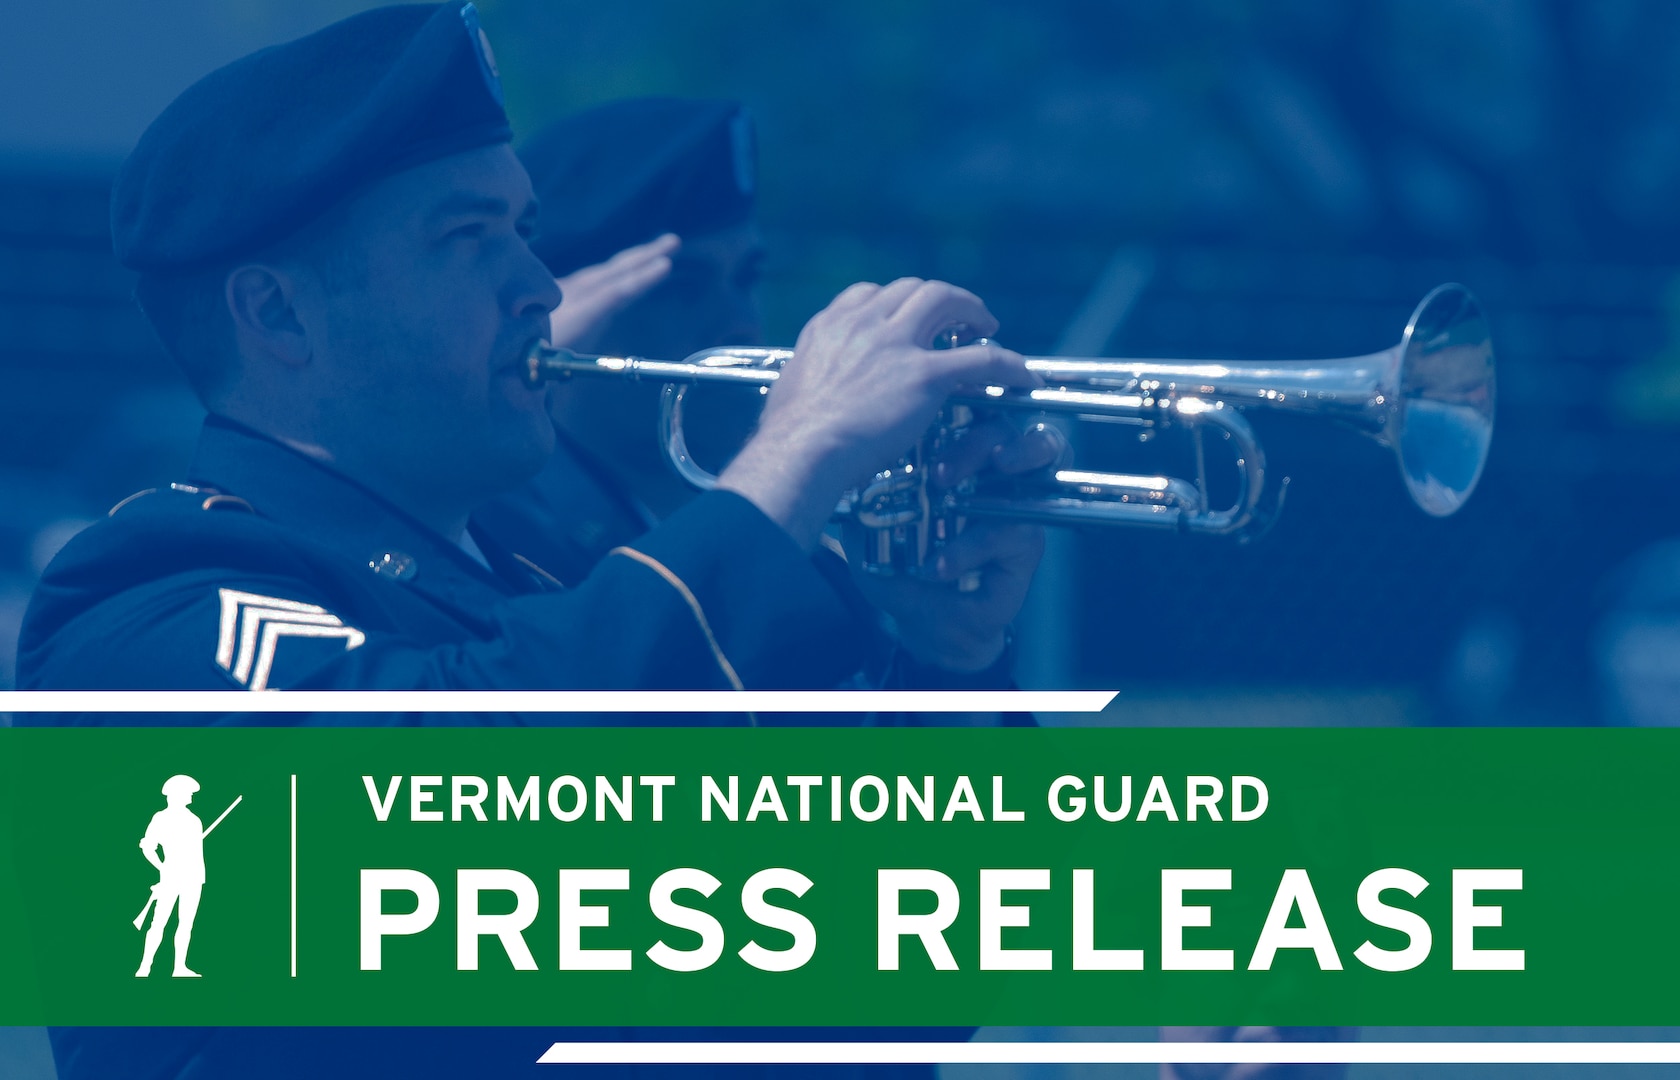 This image was designed in Adobe Illustrator and Photoshop to accompany press releases from the Vermont National Guard. (Vermont National Guard photo illustration by Acting Deputy Public Affairs Officer Marcus Tracy)